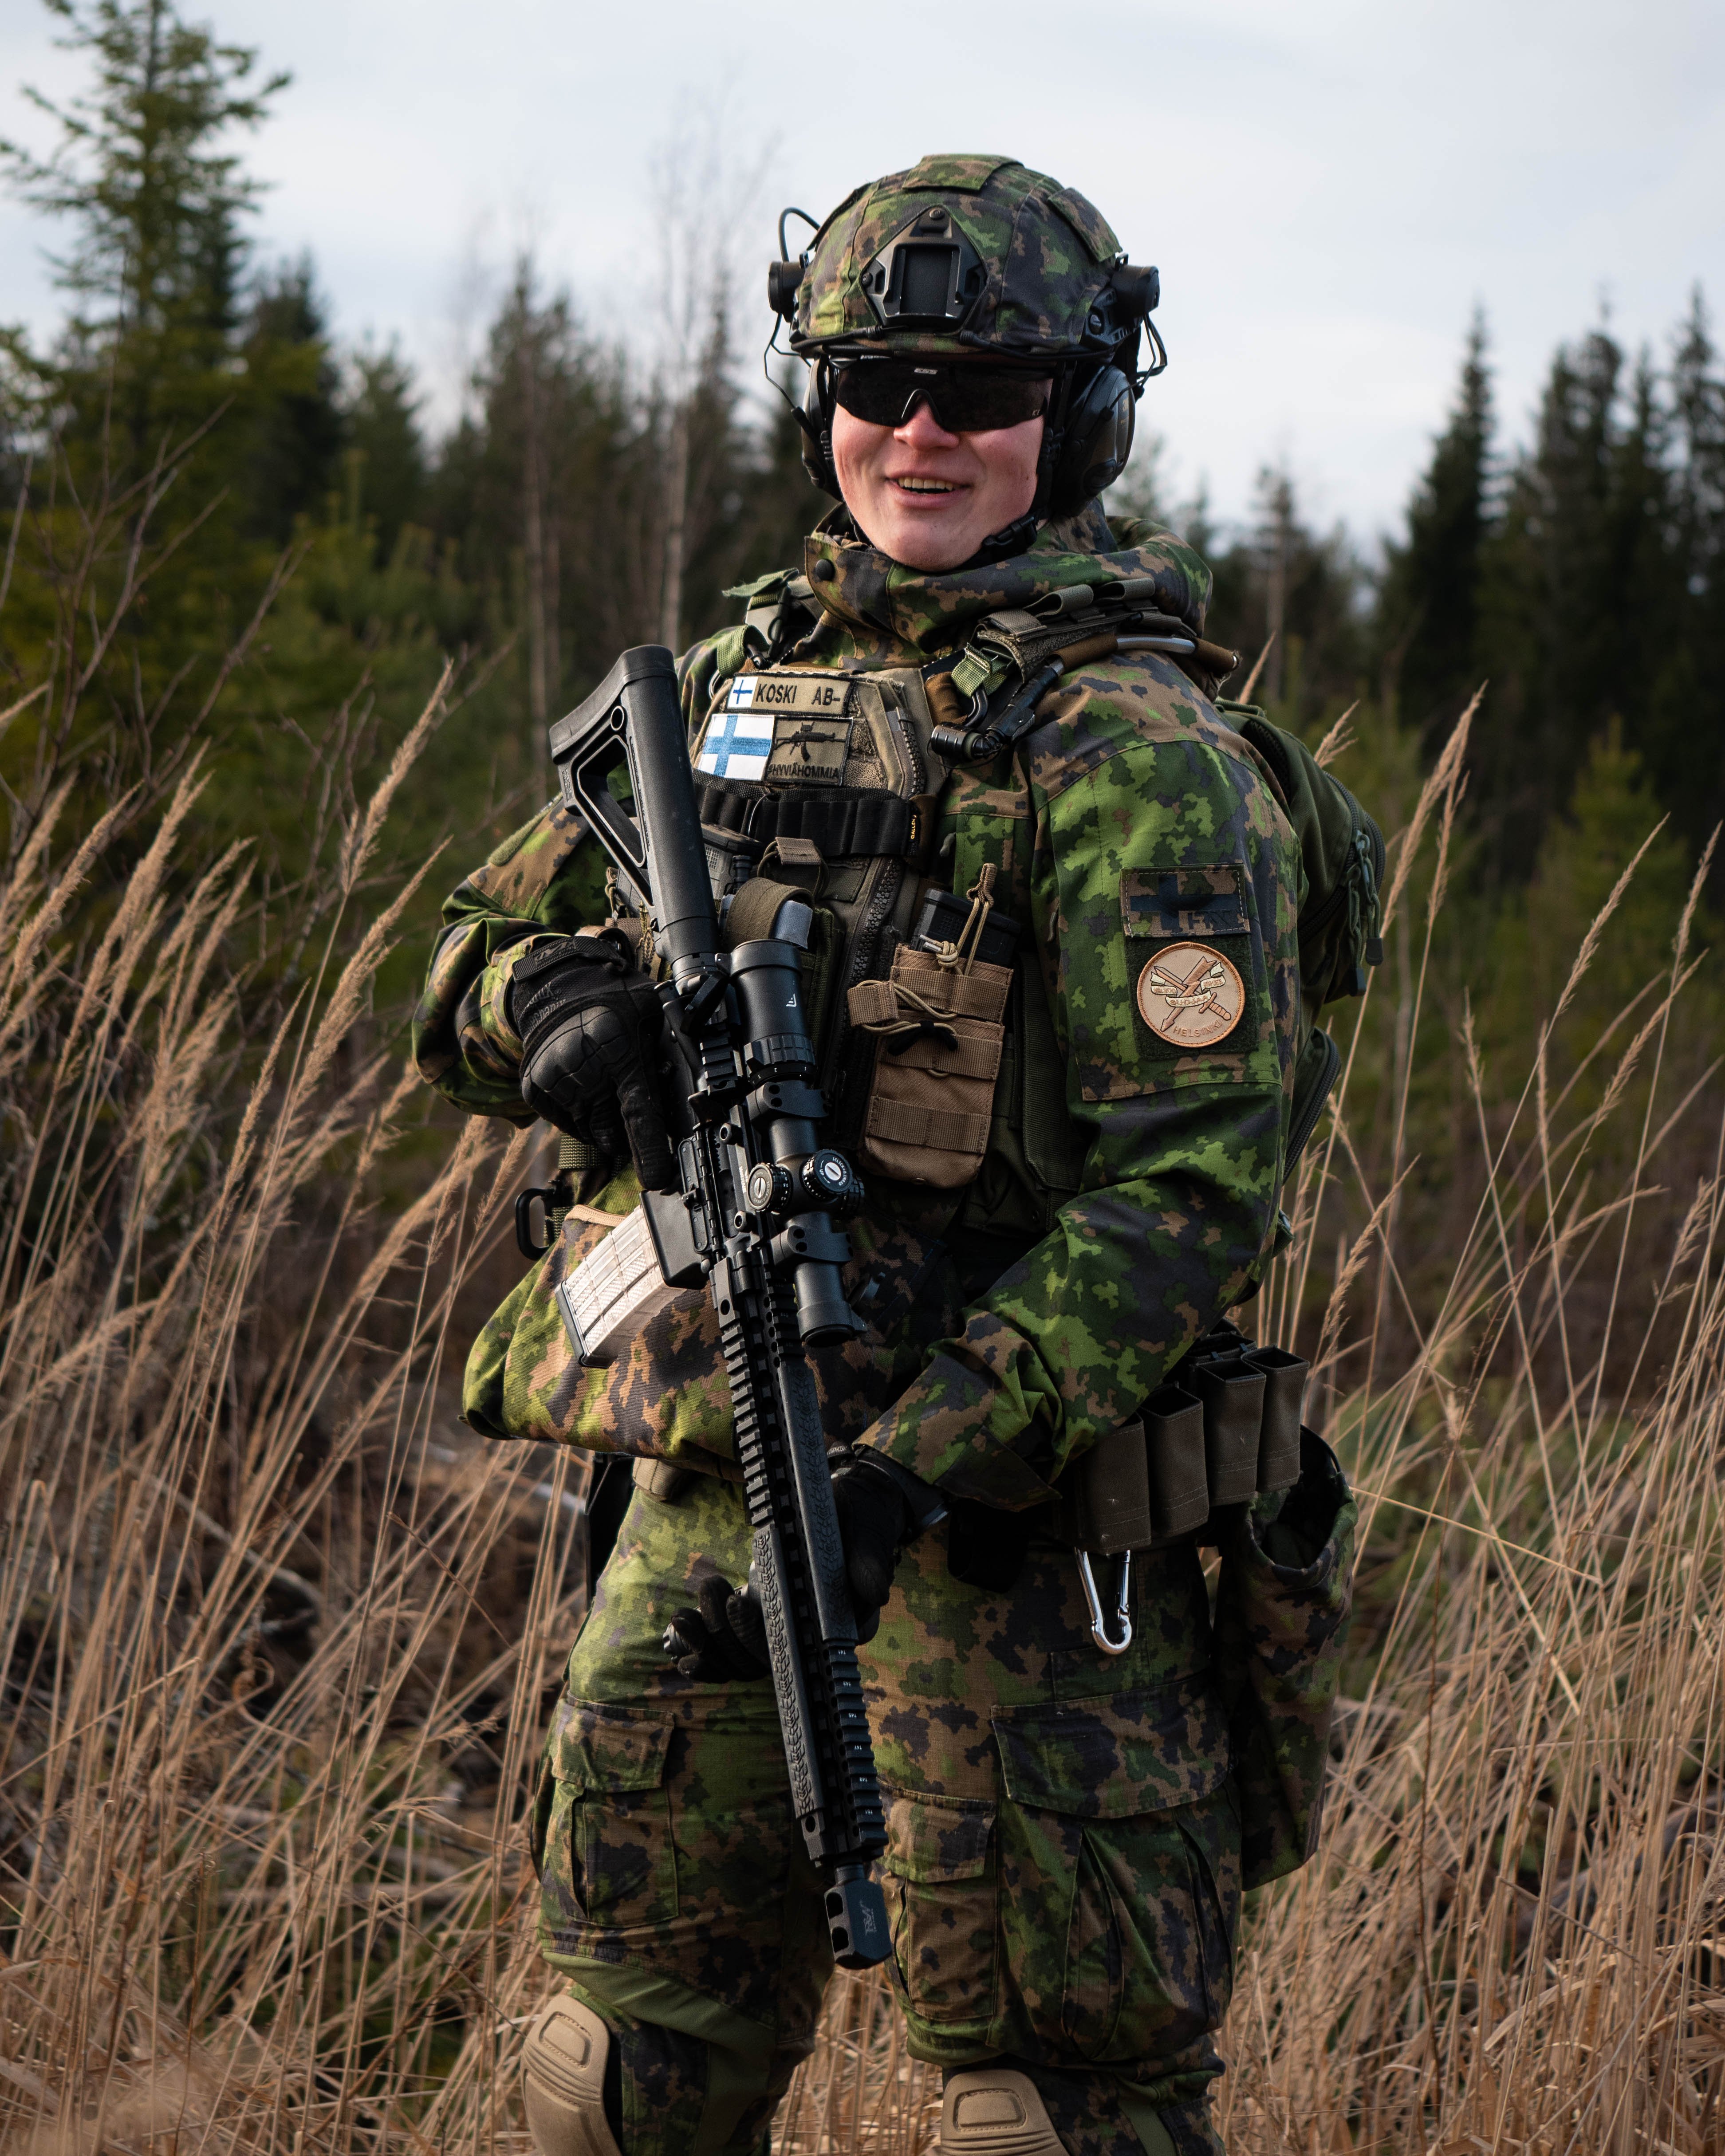 Man in army uniform is standing in the middle of a field. He has a rifle.